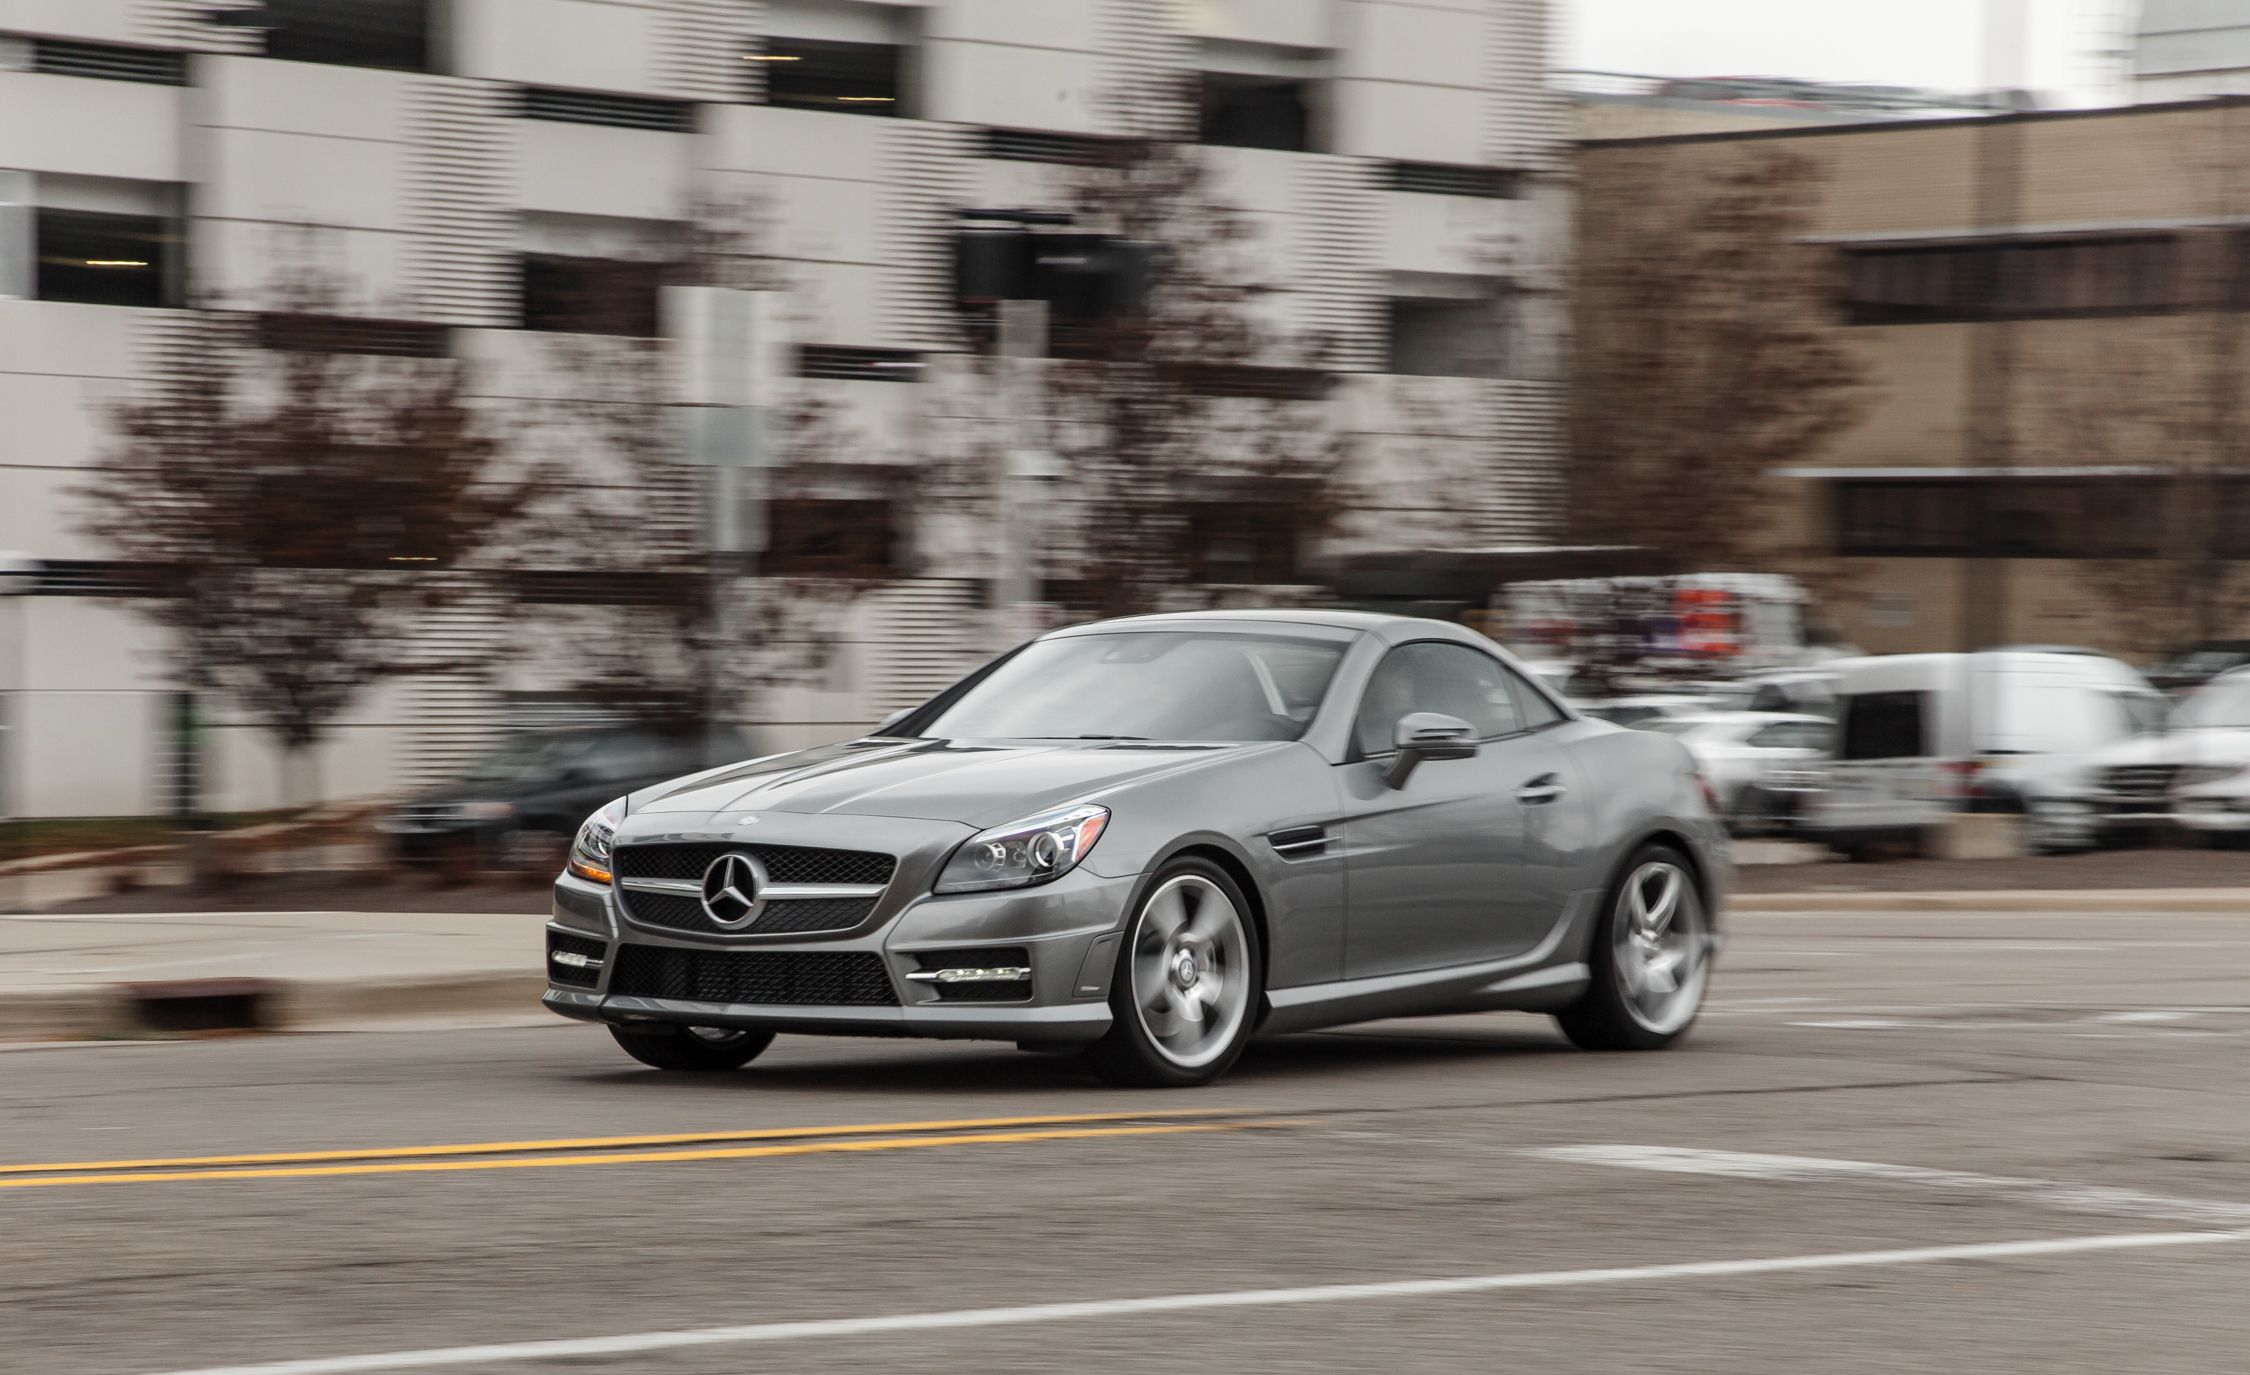 The 2015 MercedesBenz SLK250: Unveiling Issues and Customer Concerns